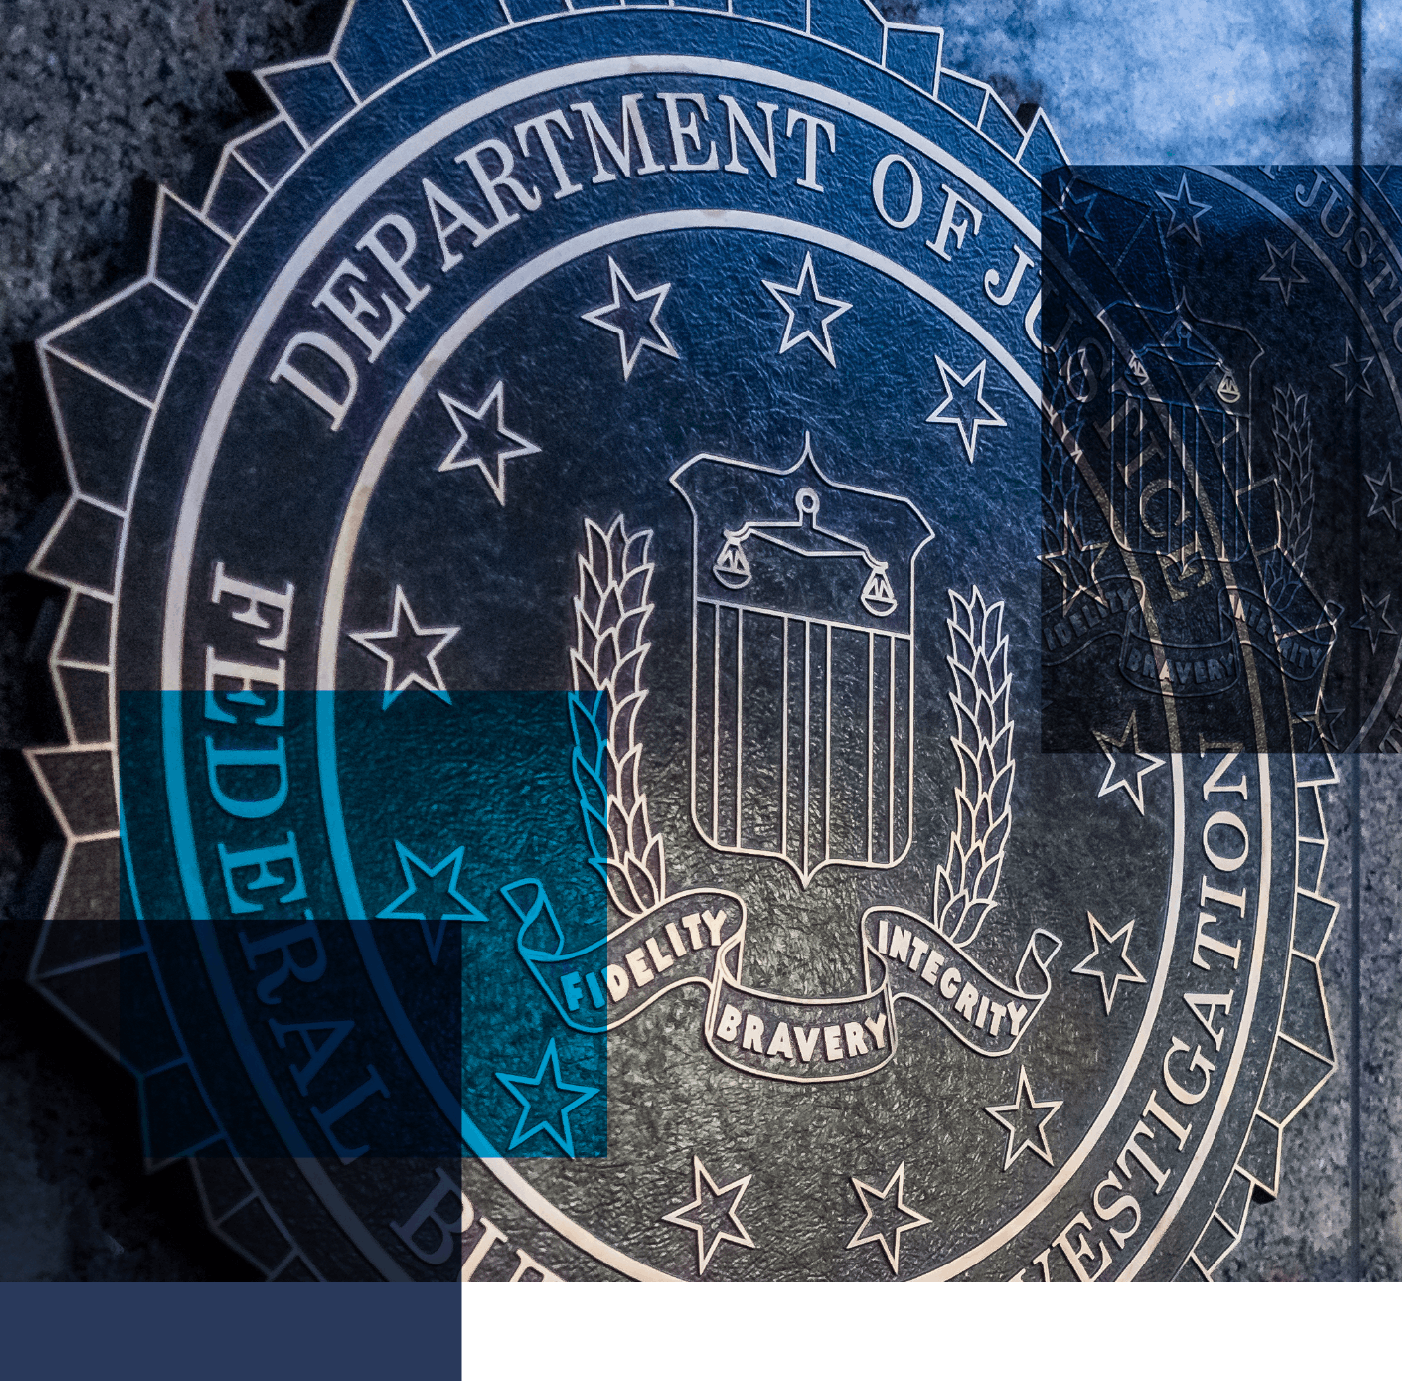 Cropped image of the seal of the FBI with the words "Department of Justice" and "Federal Bureau of Investigation" also three different rectangular color fields transposed on top in grey and blue.